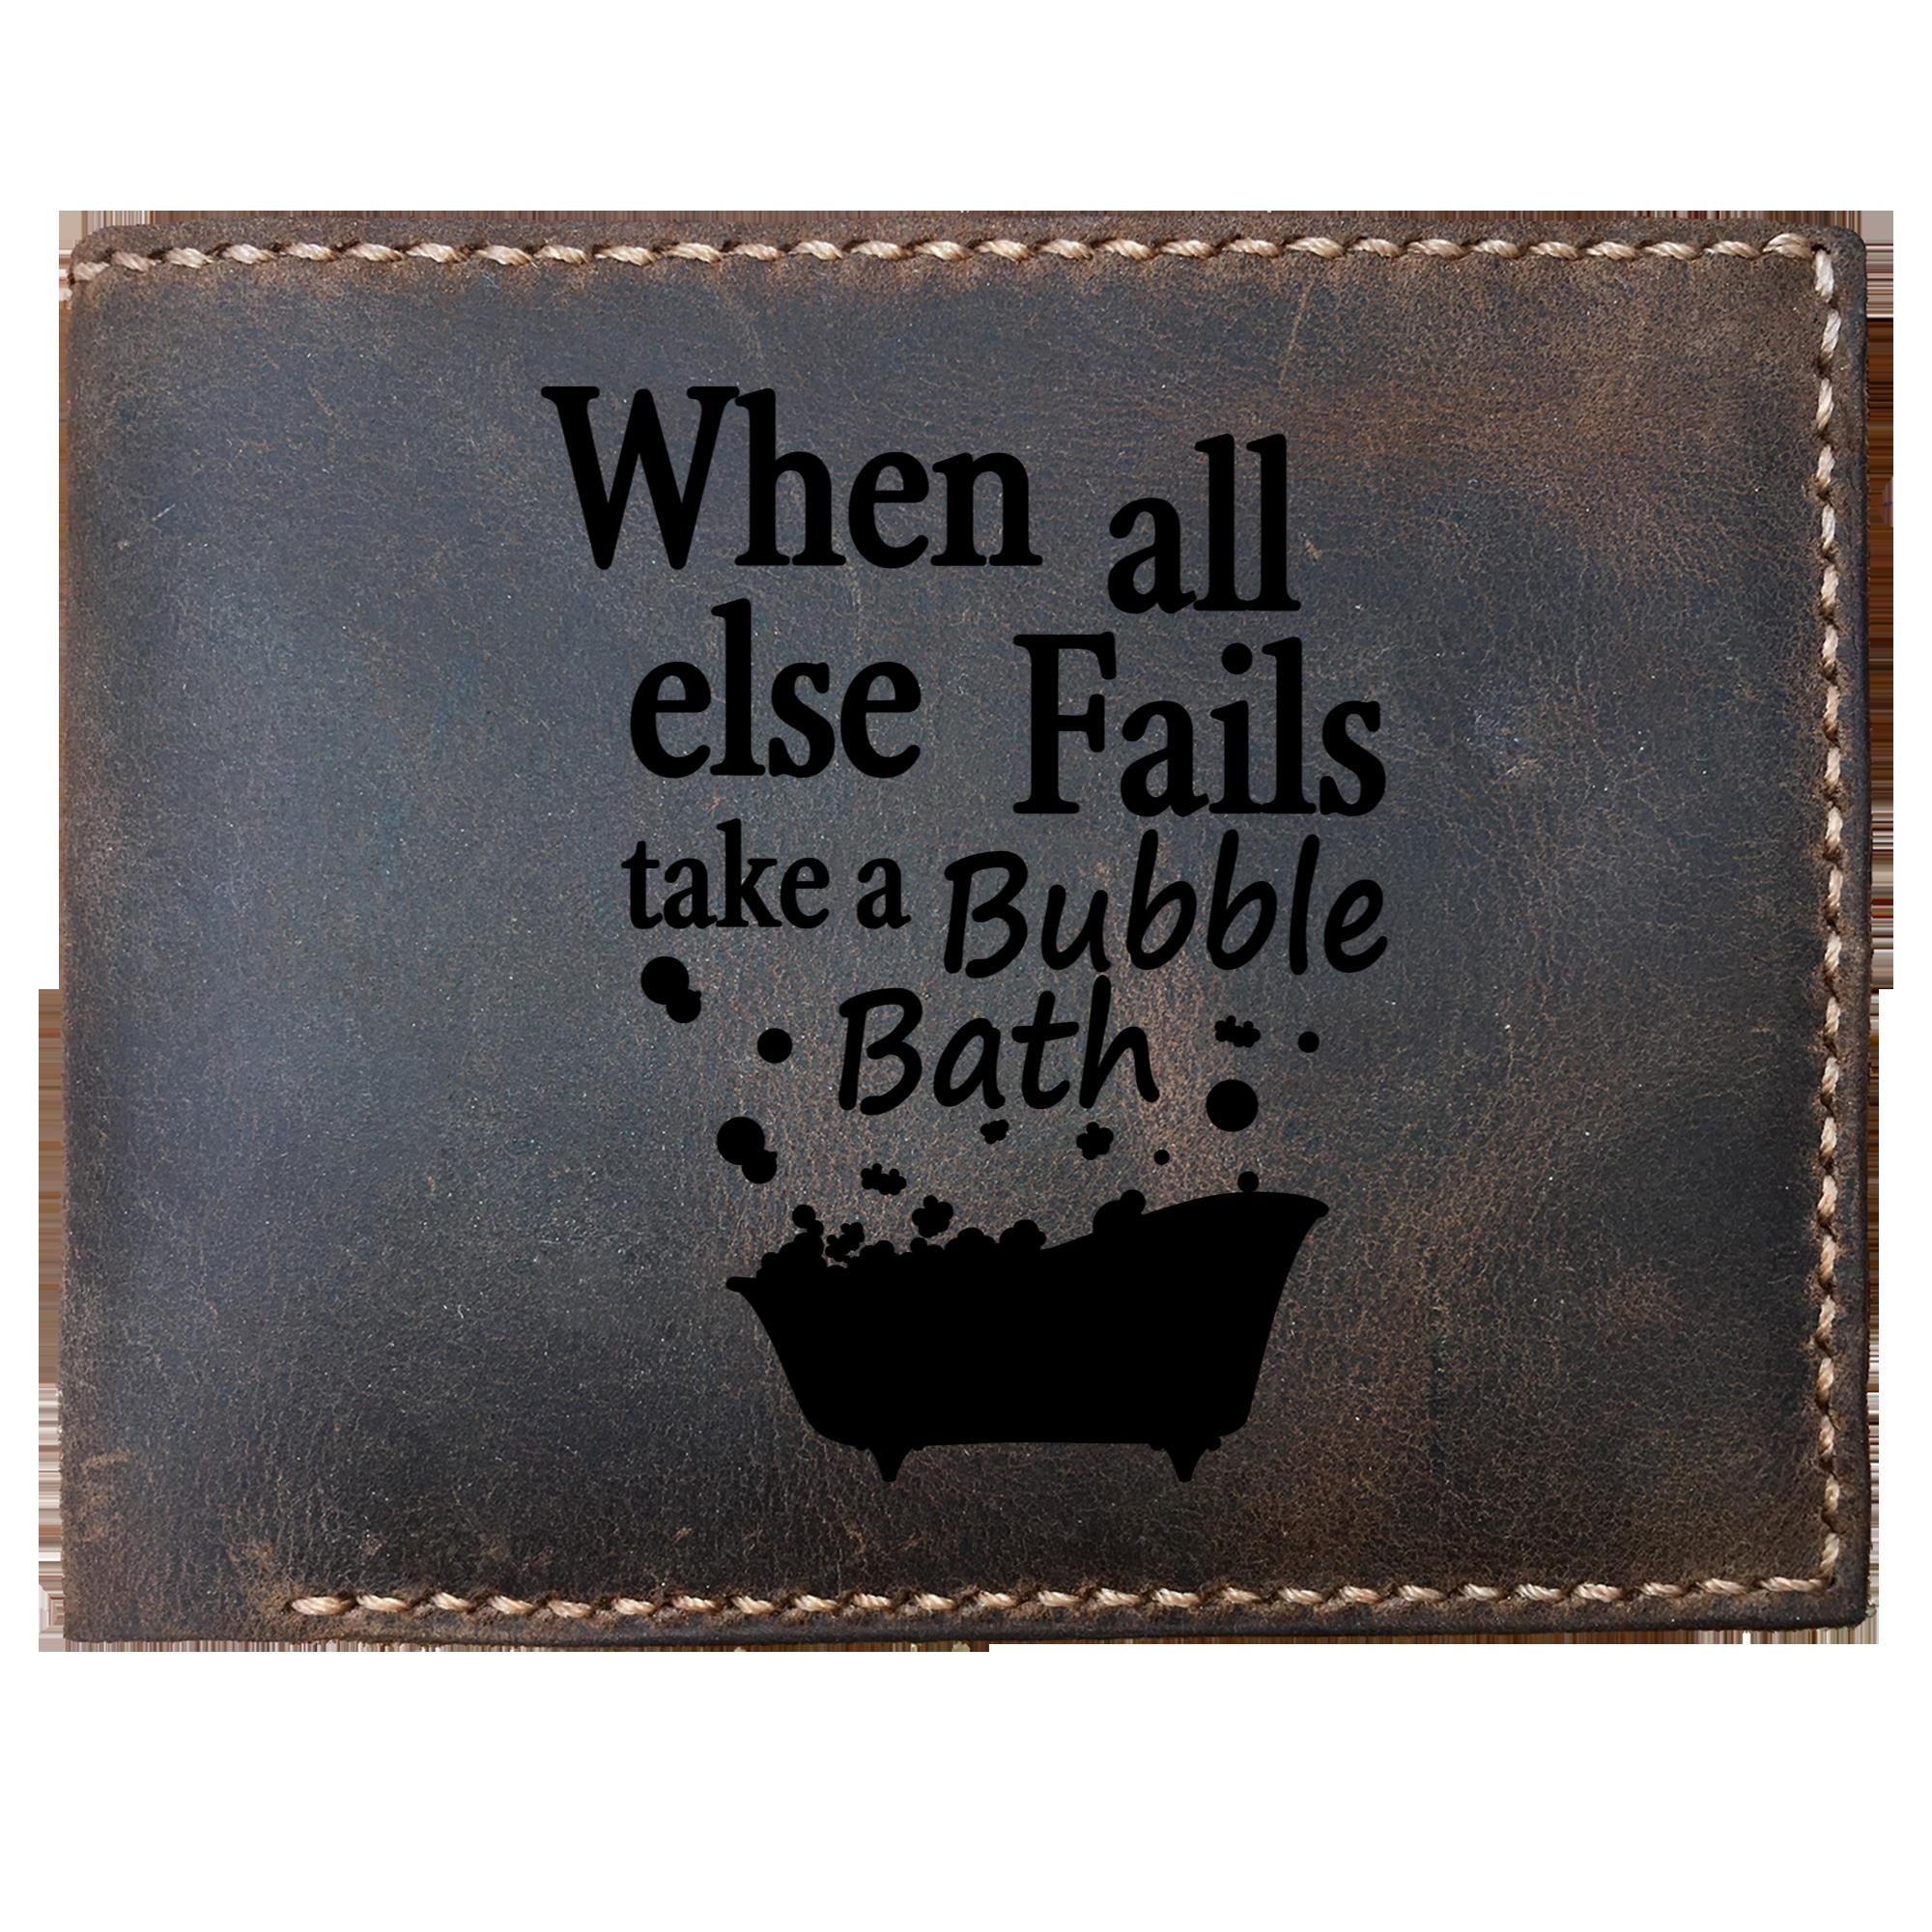 Skitongifts Funny Custom Laser Engraved Bifold Leather Wallet For Men, When All Else Fails Take A Bubble Bath